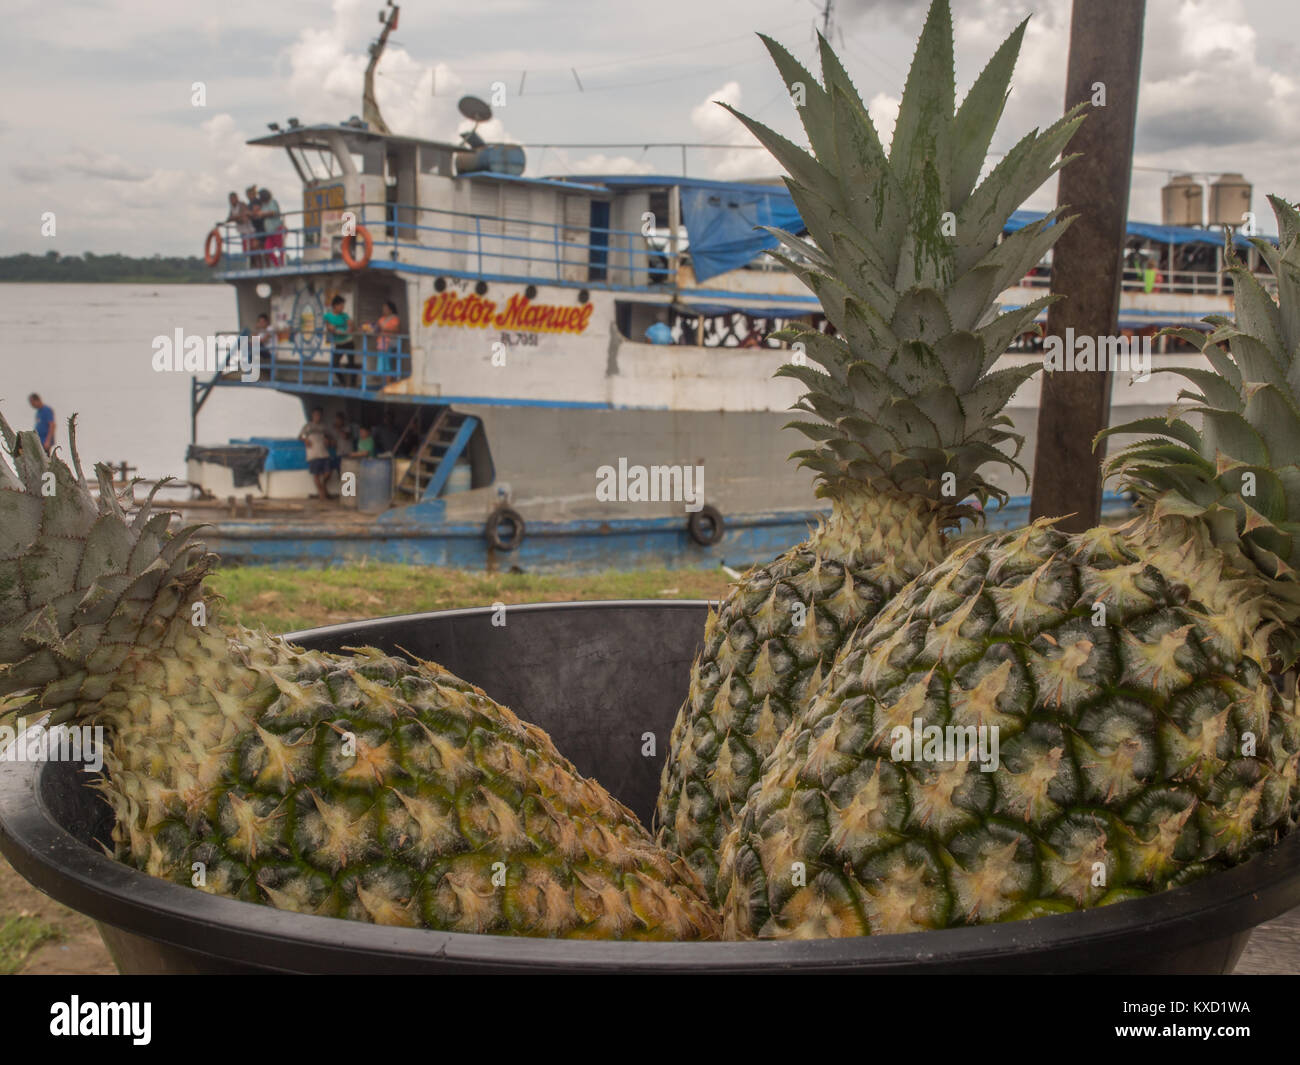 Amazon River, Peru - December 11, 2017: Pineapple in a bowl on the background of a cargo boat on the Amazon river Stock Photo